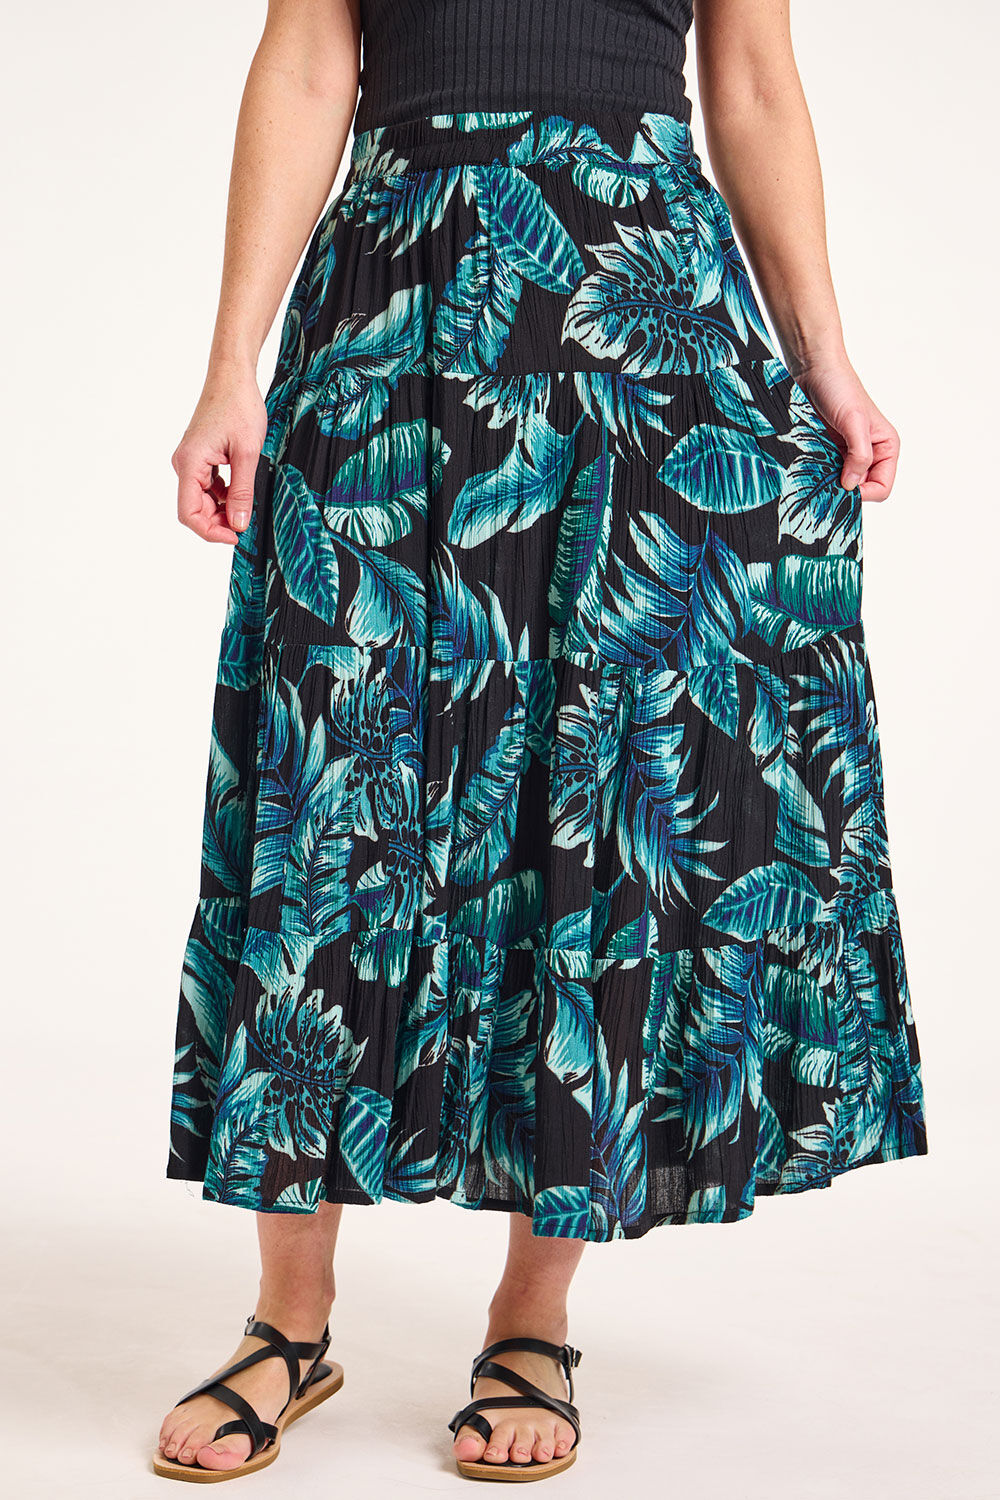 Bonmarche Black Palm Print Tiered Elasticated Crinkle Skirt, Size: 12